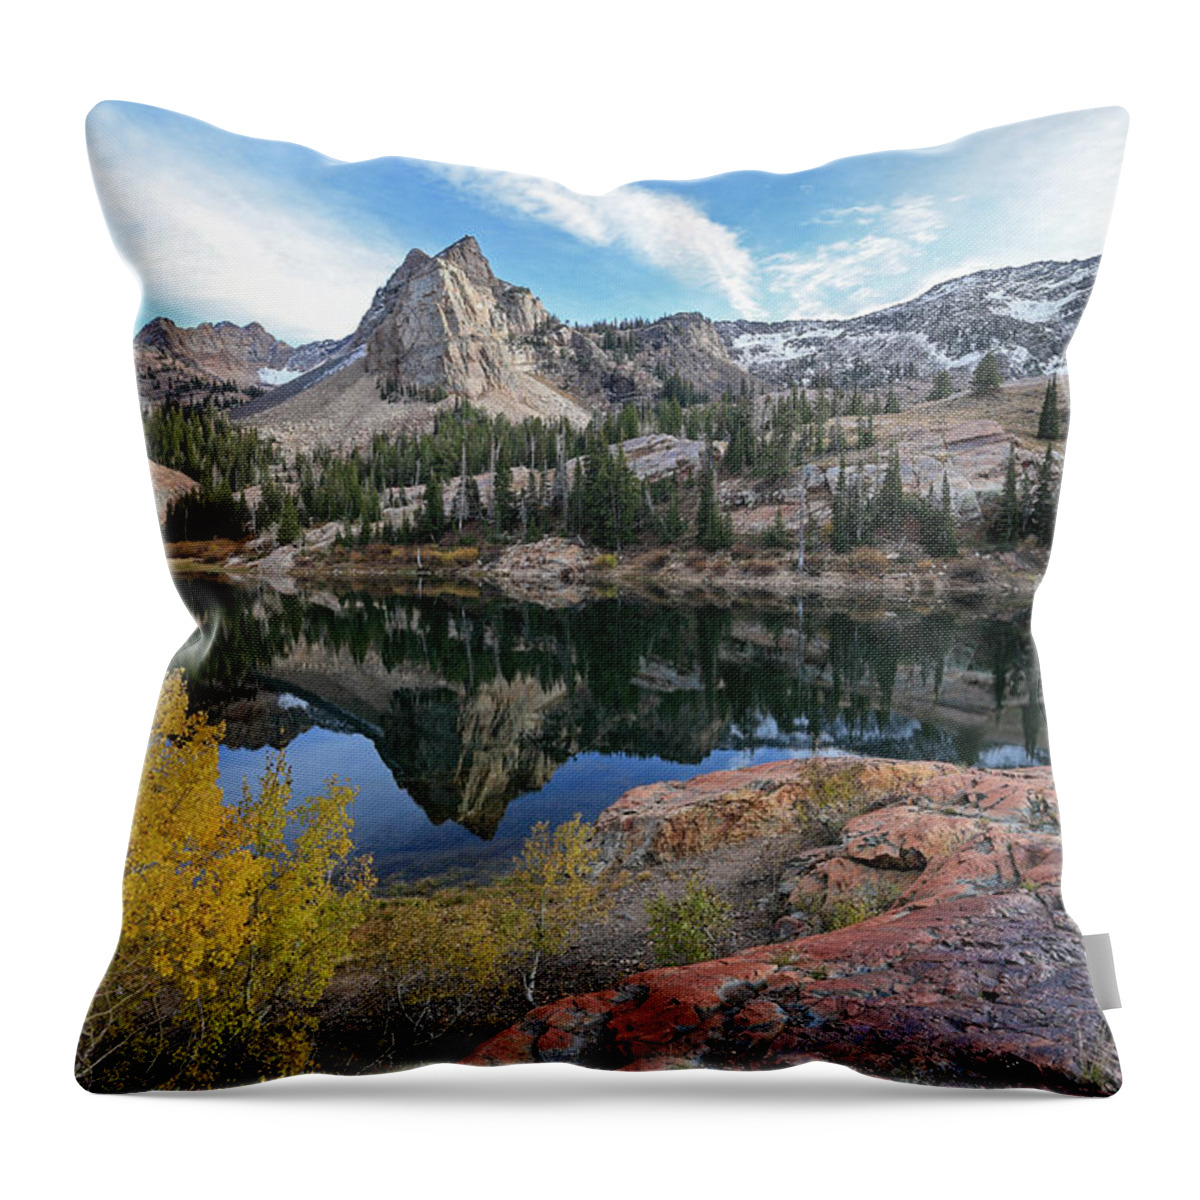 Utah; Landscape; Aspen; Autumn; Fall; Foliage; Granite; Yellow; Golden; Orange; Glow; Blue; Leaves; Wasatch Mountains; Little Cottonwood Canyon; Throw Pillow featuring the photograph Lake Blanche and the Sundial - Big Cottonwood Canyon, Utah - October '06 by Brett Pelletier